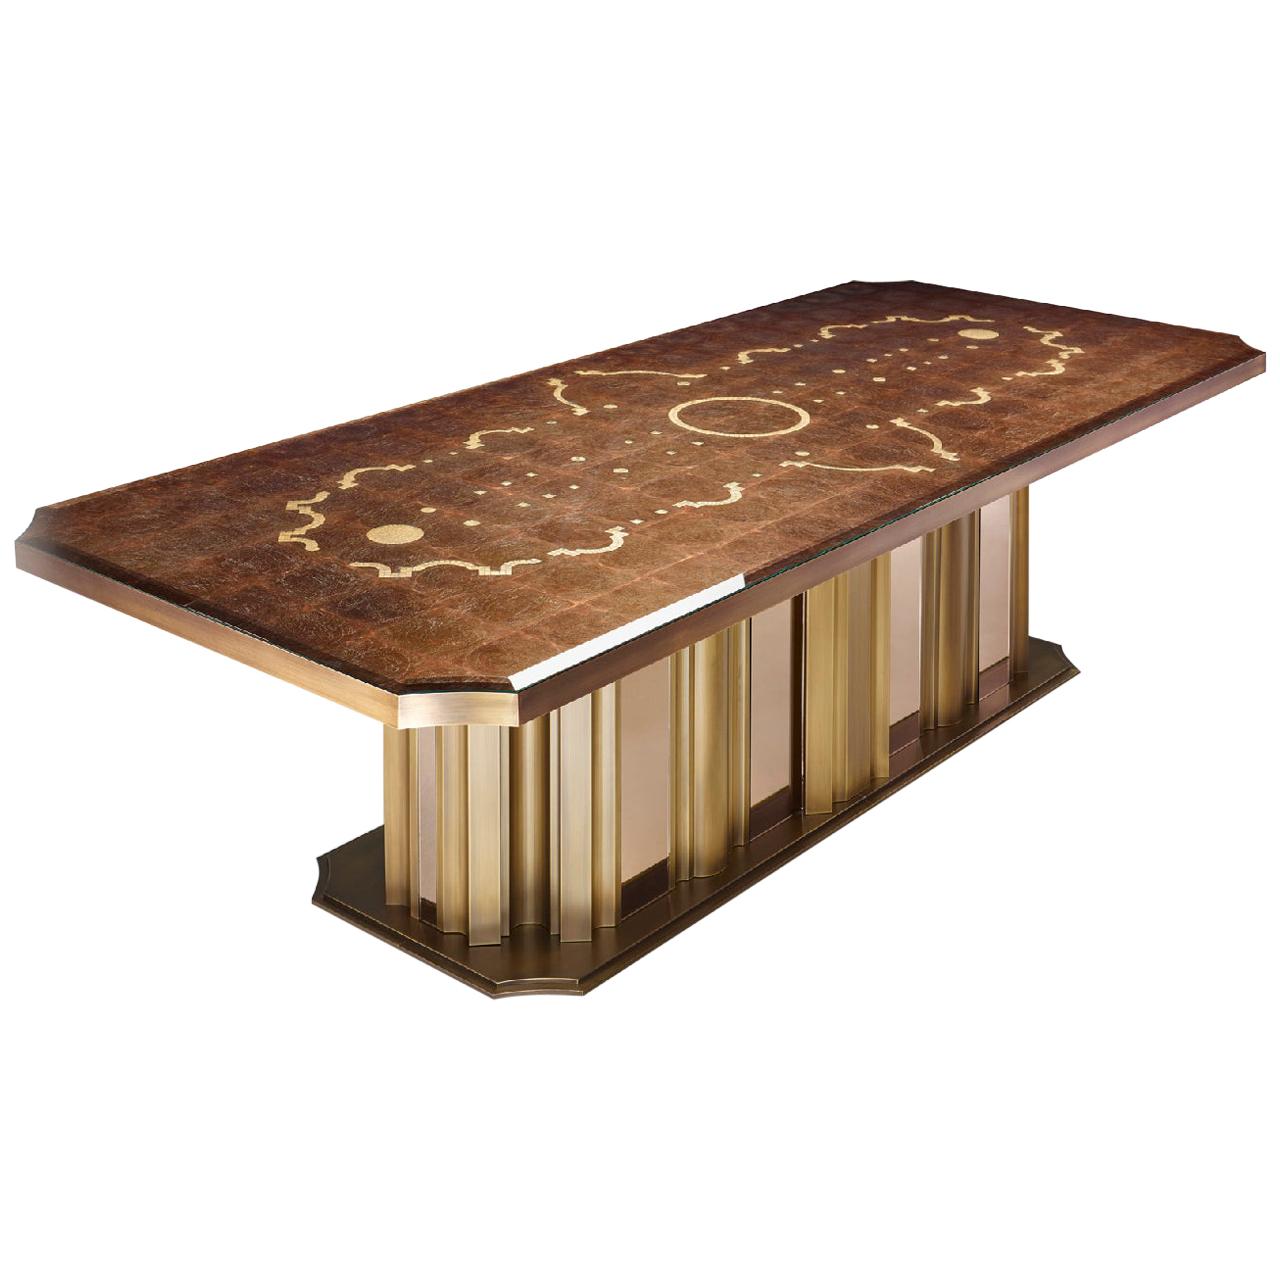 Table Bronzed Brass & Amber Mirror Bronze Leaf Glass with Decorative Mosaic Top